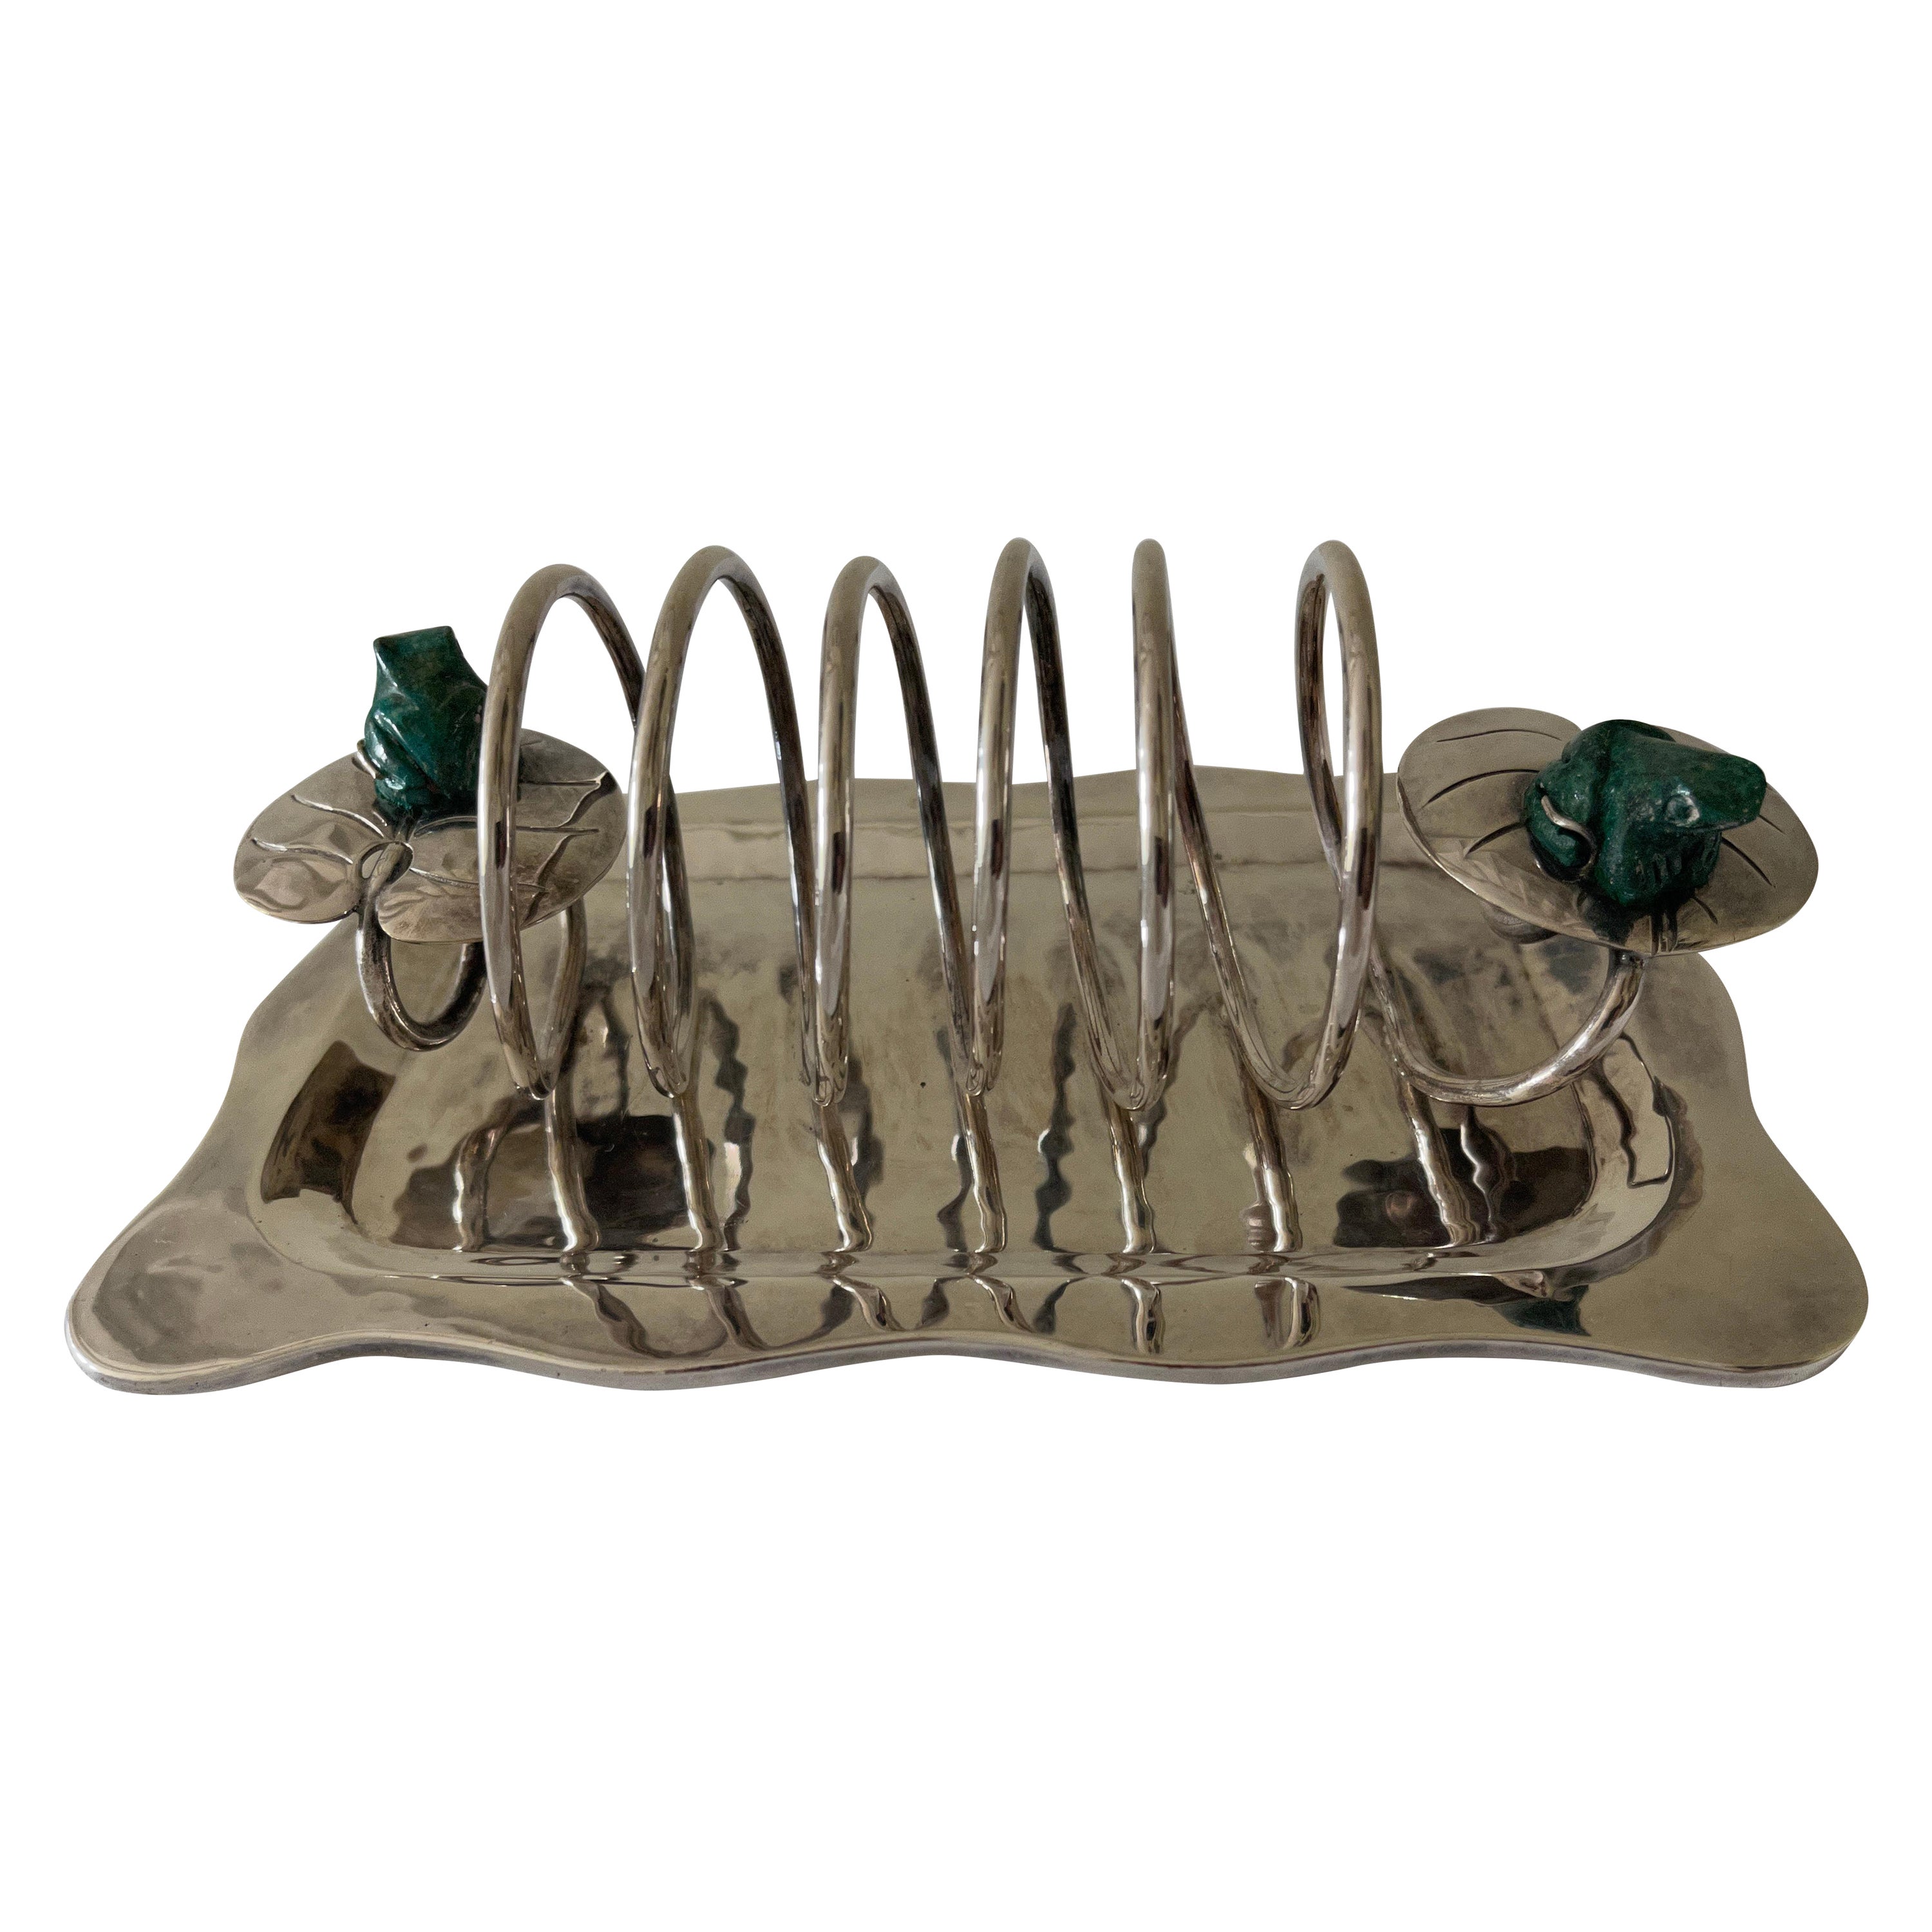 Emilia Castillo Mexican Silver Plate Toast Rack with Malachite Frogs on Lily Pad